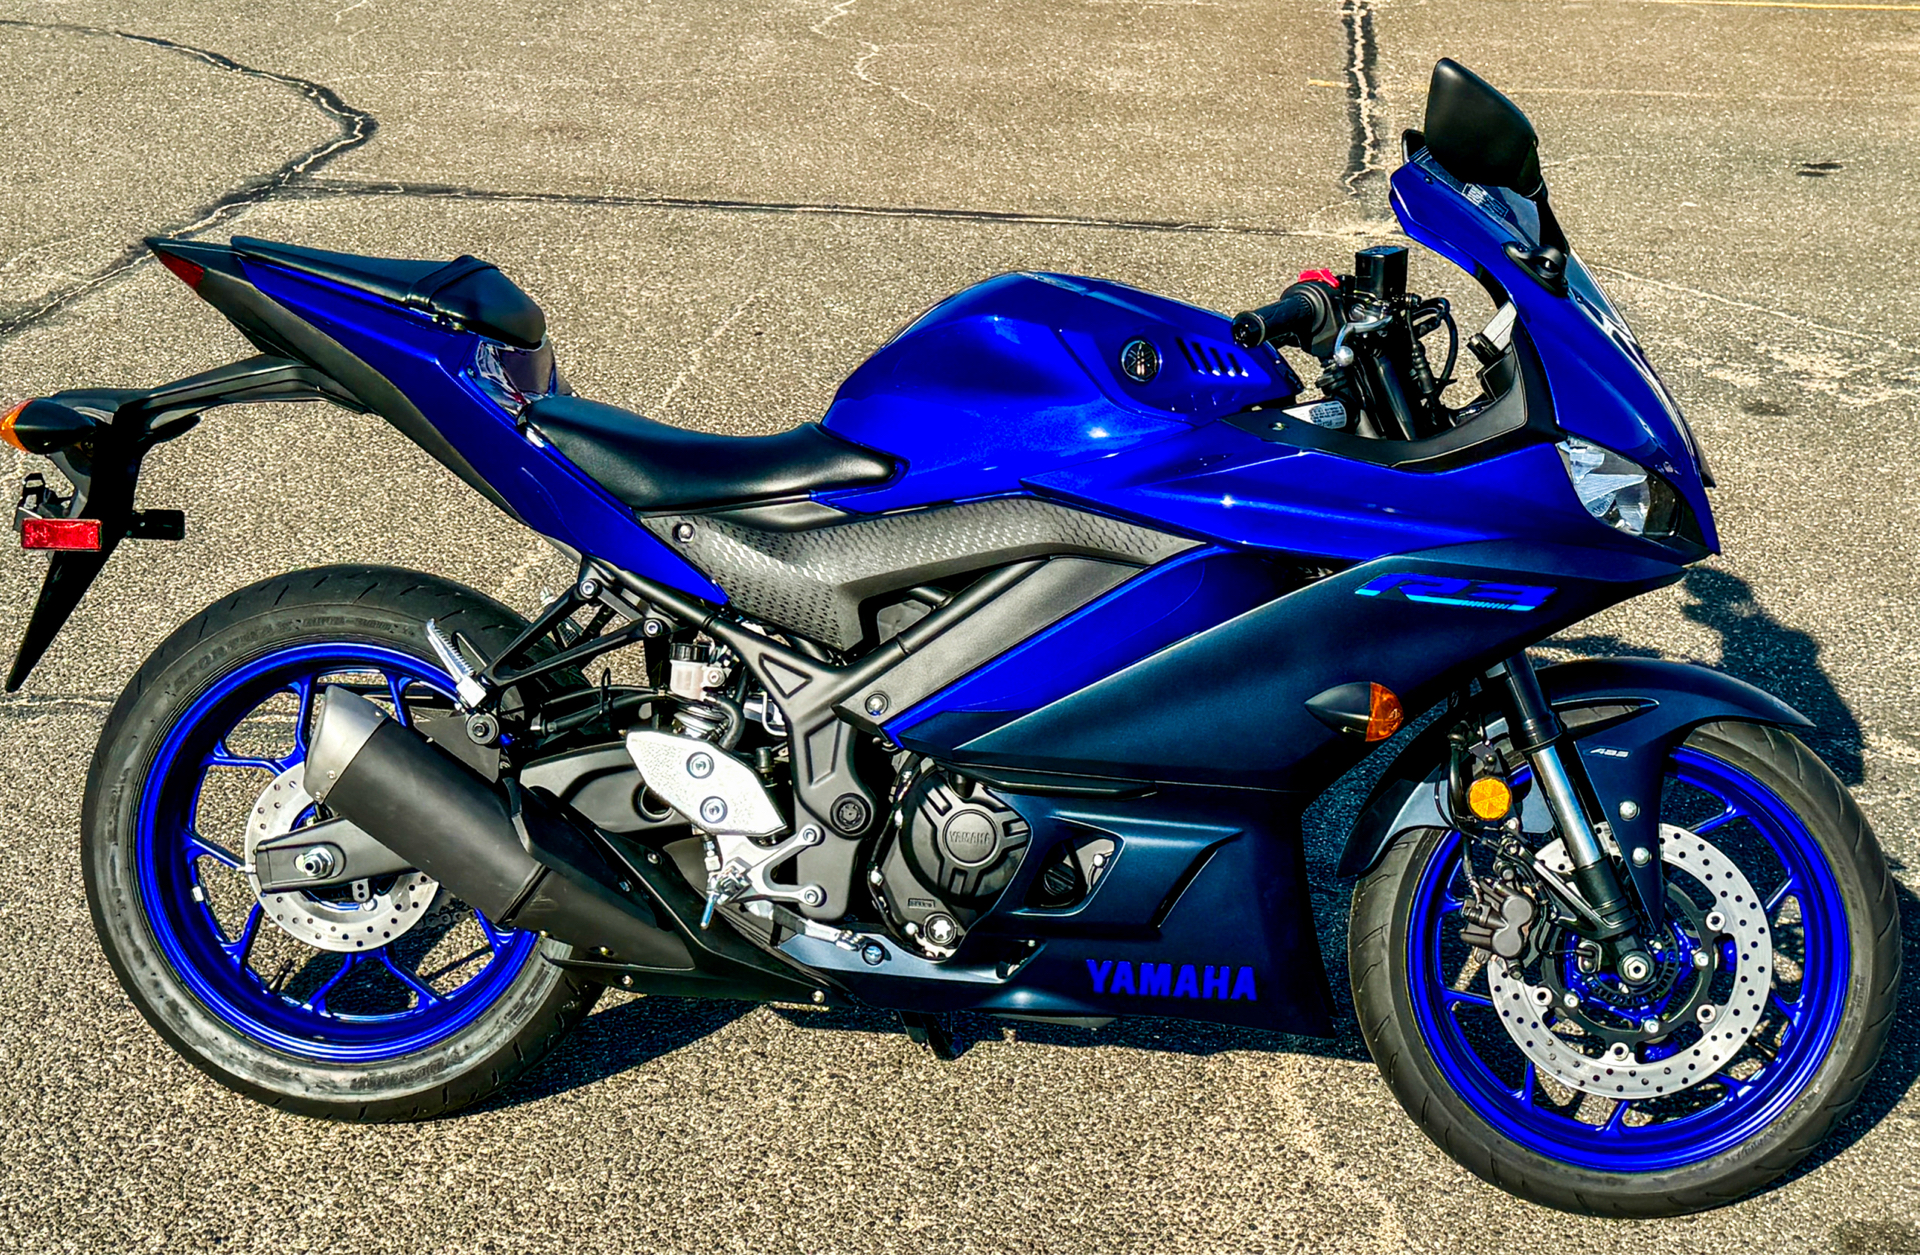 2023 Yamaha YZF-R3 ABS in Enfield, Connecticut - Photo 7